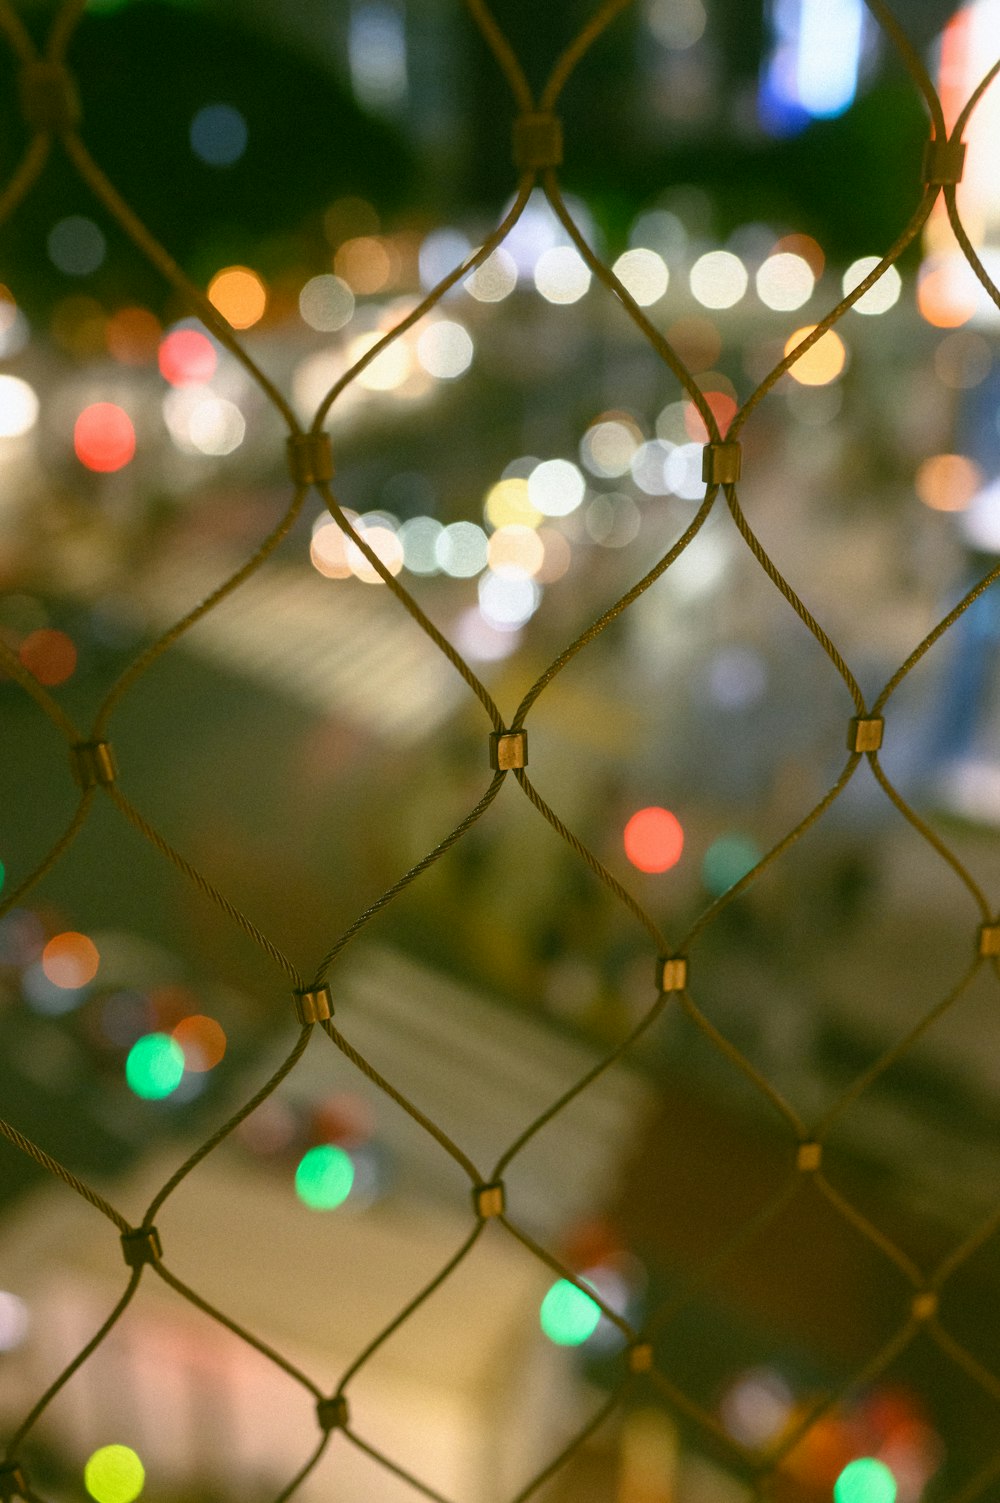 a close up of a chain link fence at night